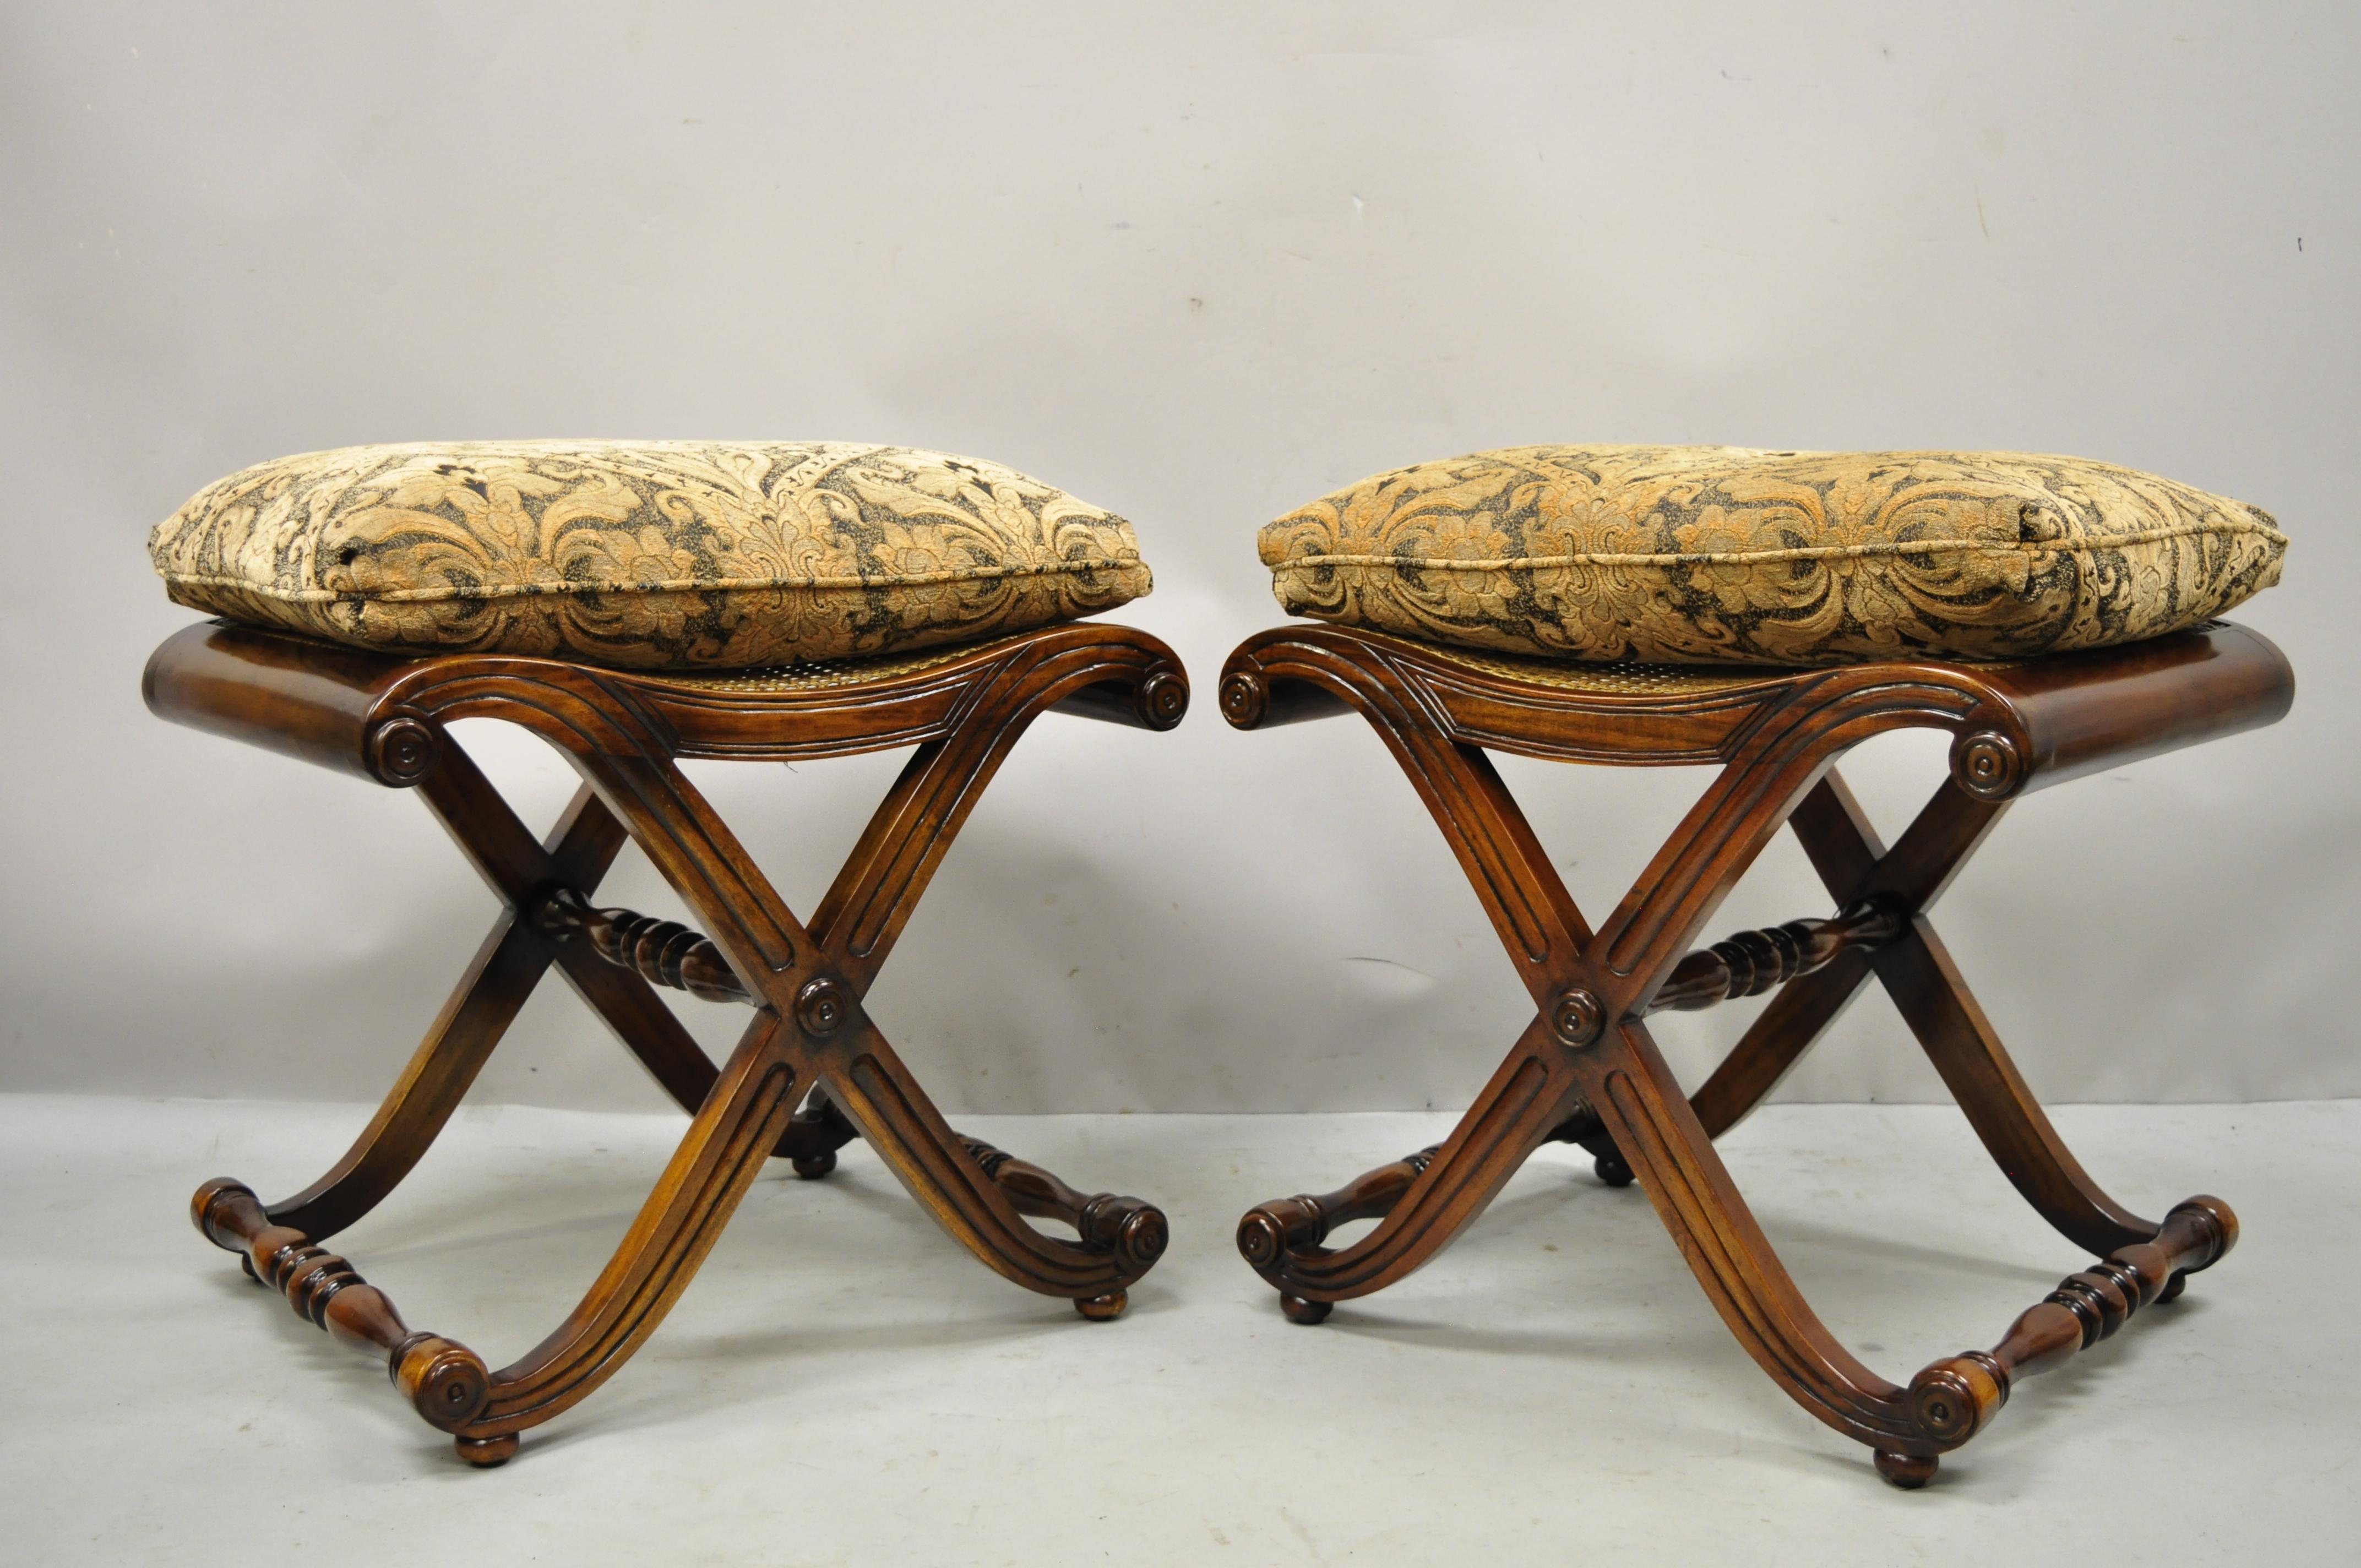 Italian Regency style mahogany and cane curule X-frame stools with cushions - a pair. Item features cane seat, loose pillows, curule x-form stretcher bases, solid wood construction, beautiful wood grain, nicely carved details, very nice pair,